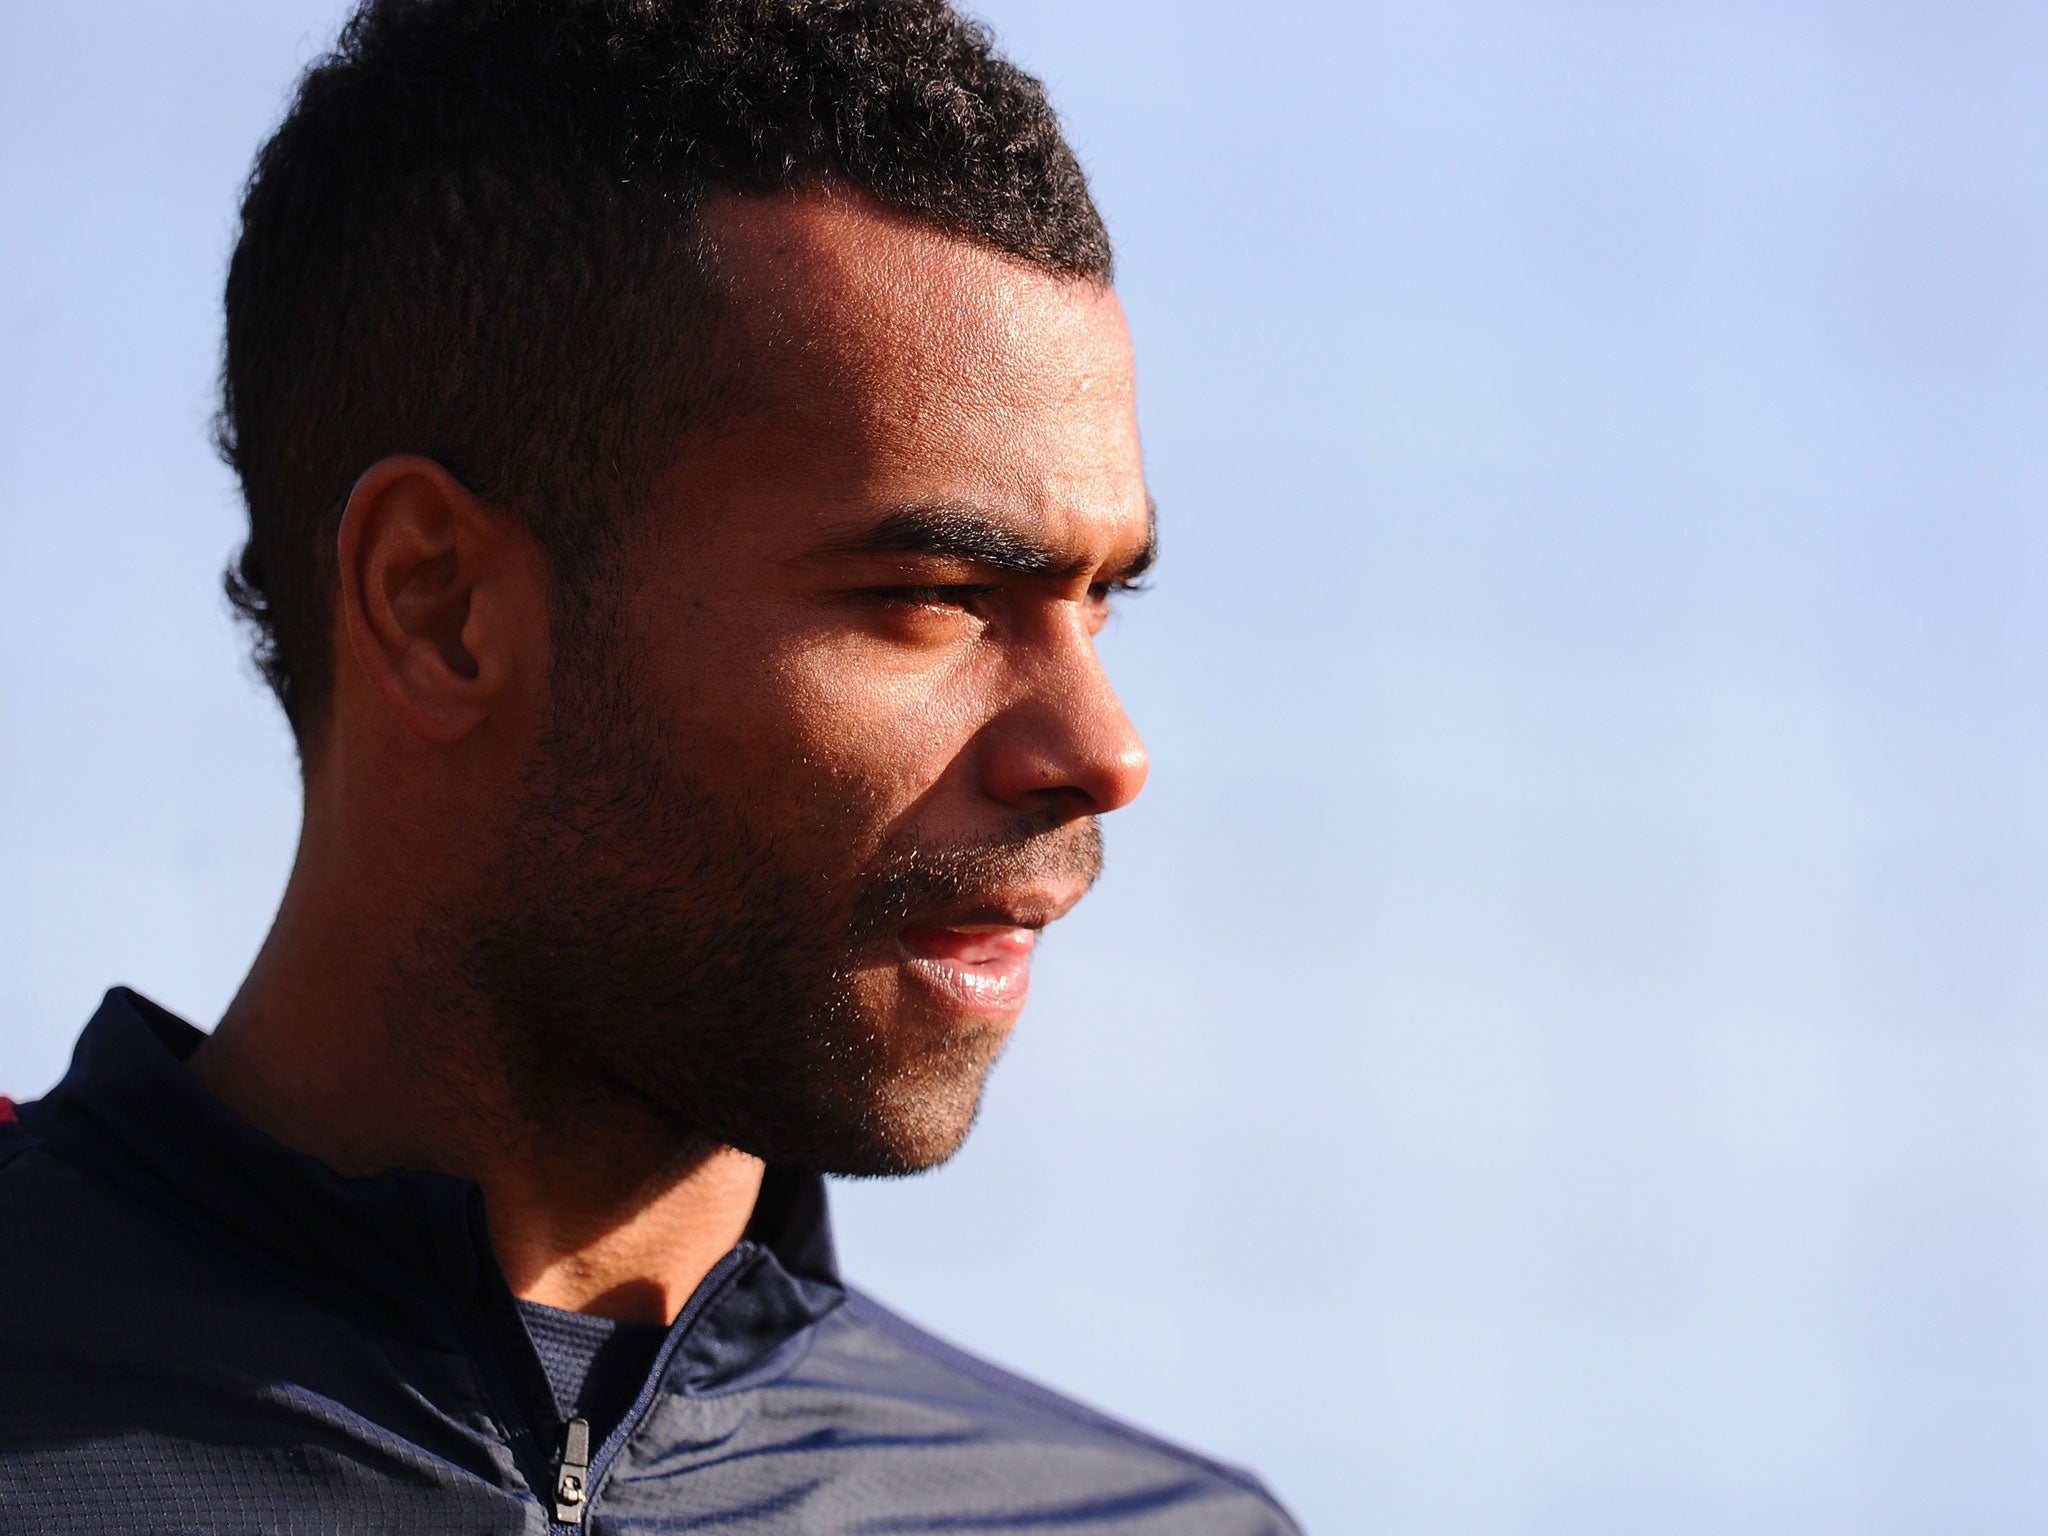 Ashley Cole has announced his decision to retire from international football